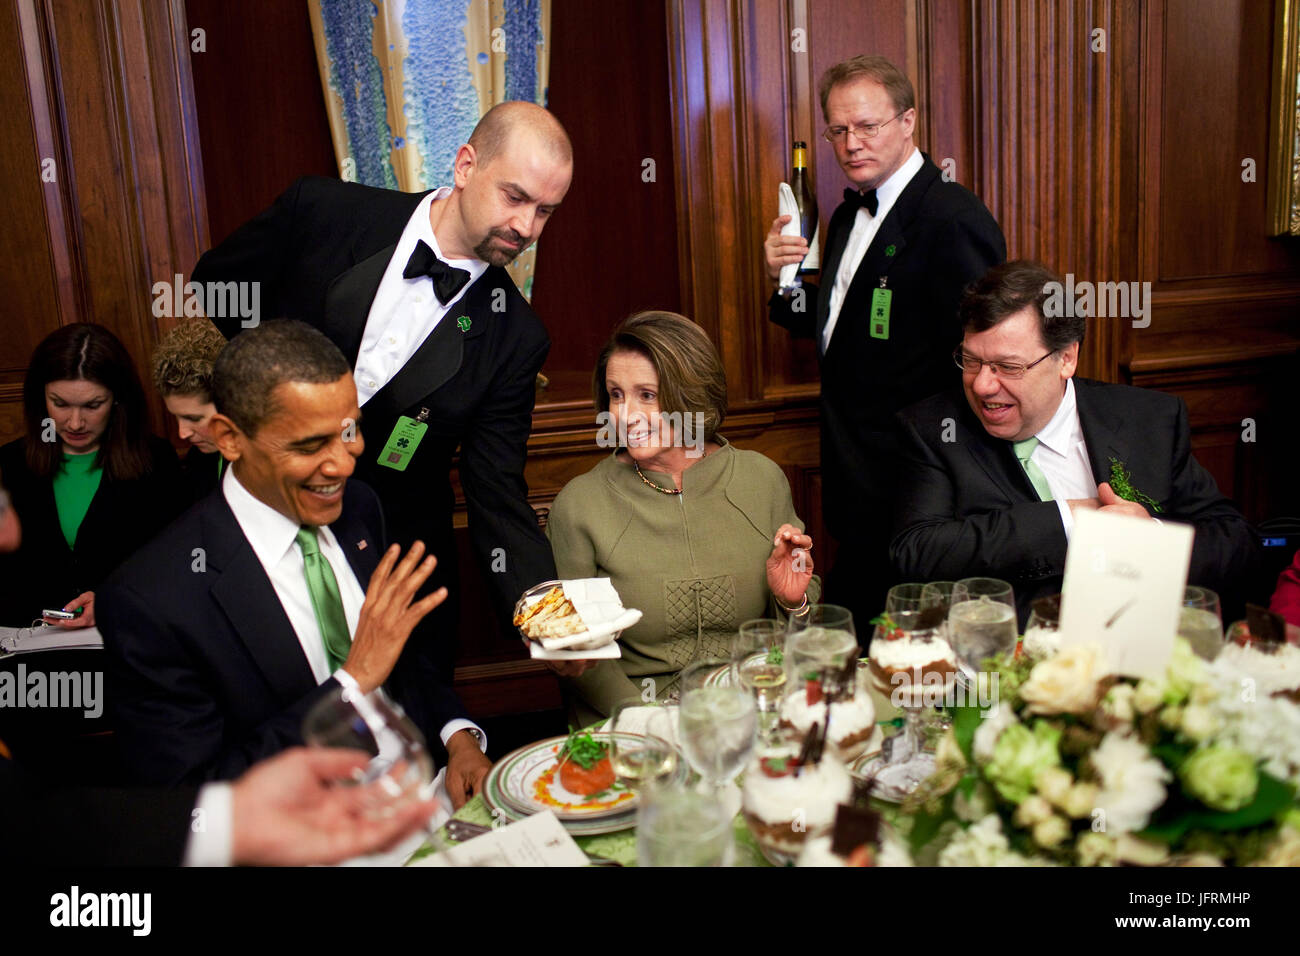 President Barack Obama and Prime Minister  Brian Cowen of Ireland attend a St. Patrick's Day lunch hosted by House Speaker Nancy Pelosi in the Rayburn Building, U.S. Capitol, Washington D.C. 3/17/09. Official White House Photo by Pete Souza Stock Photo